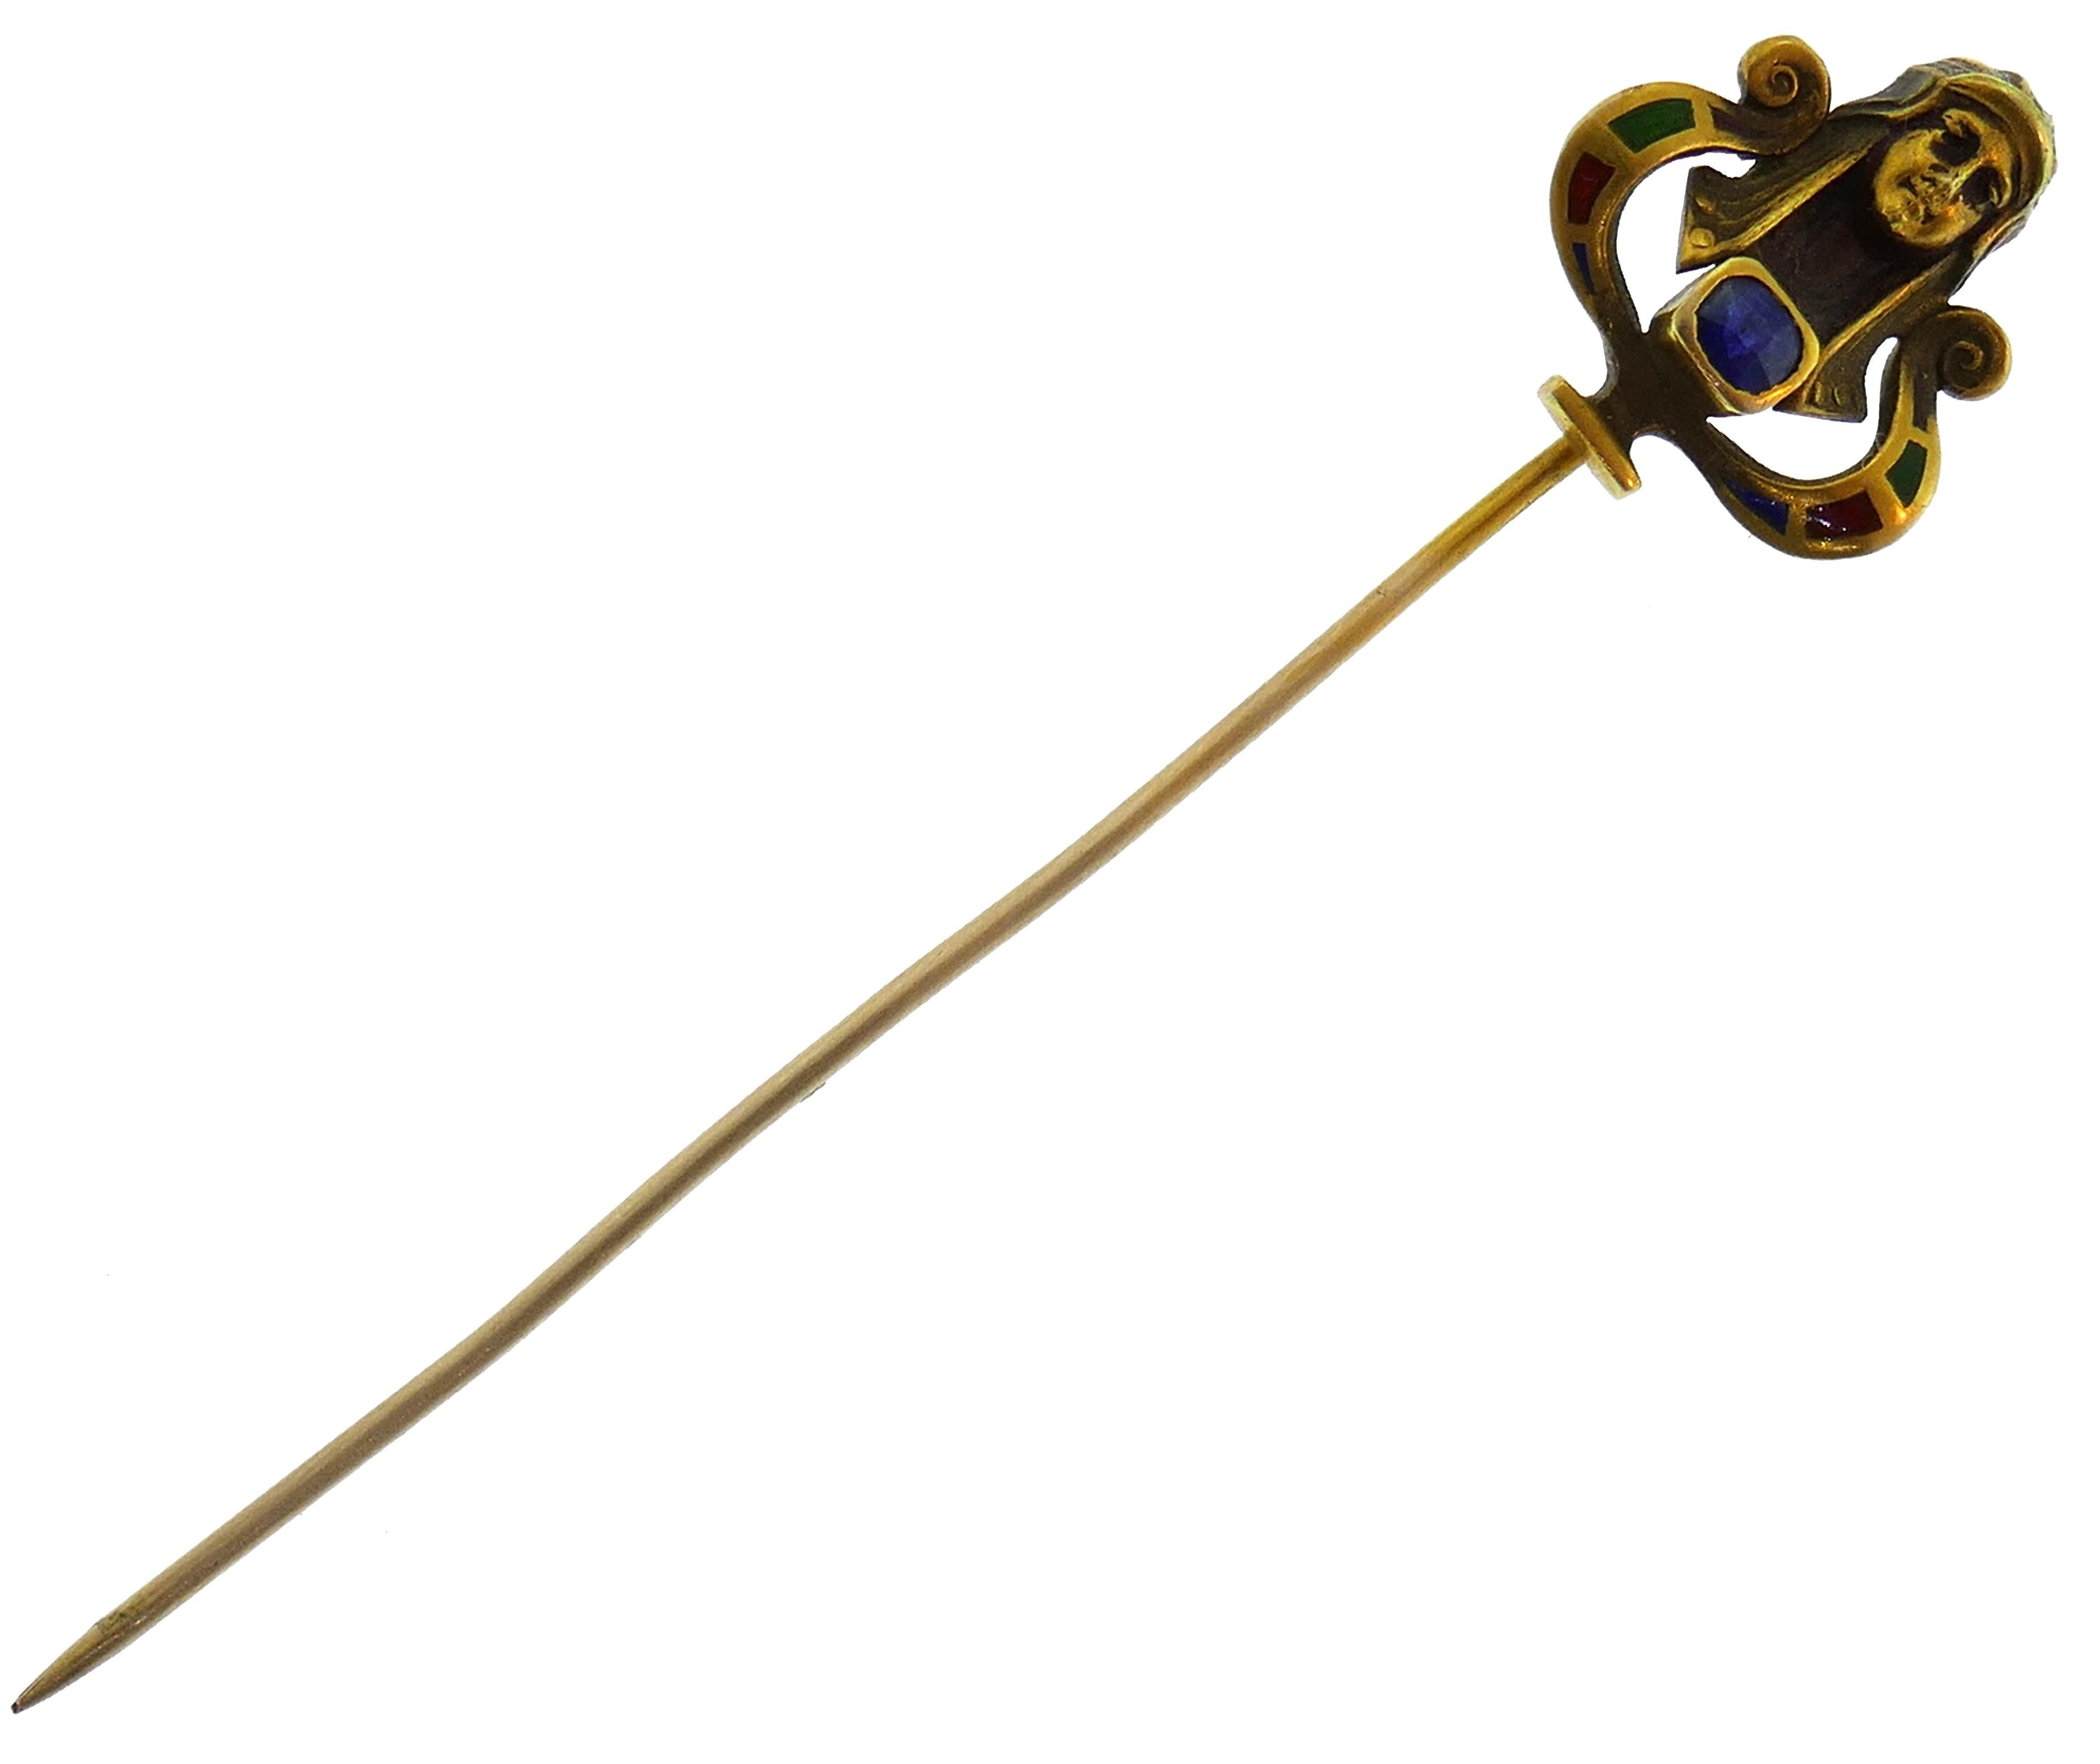 Exquisite Art Nouveau Egyptian revival hat stick pin created in the 1930s. It has a cushion cut blue sapphire set in 14 karat (stamped) yellow gold and accented with colored enamel.
The stick pin measures 2-5/8 x 1/2 inches (6.7 x 1.4 cm) long and